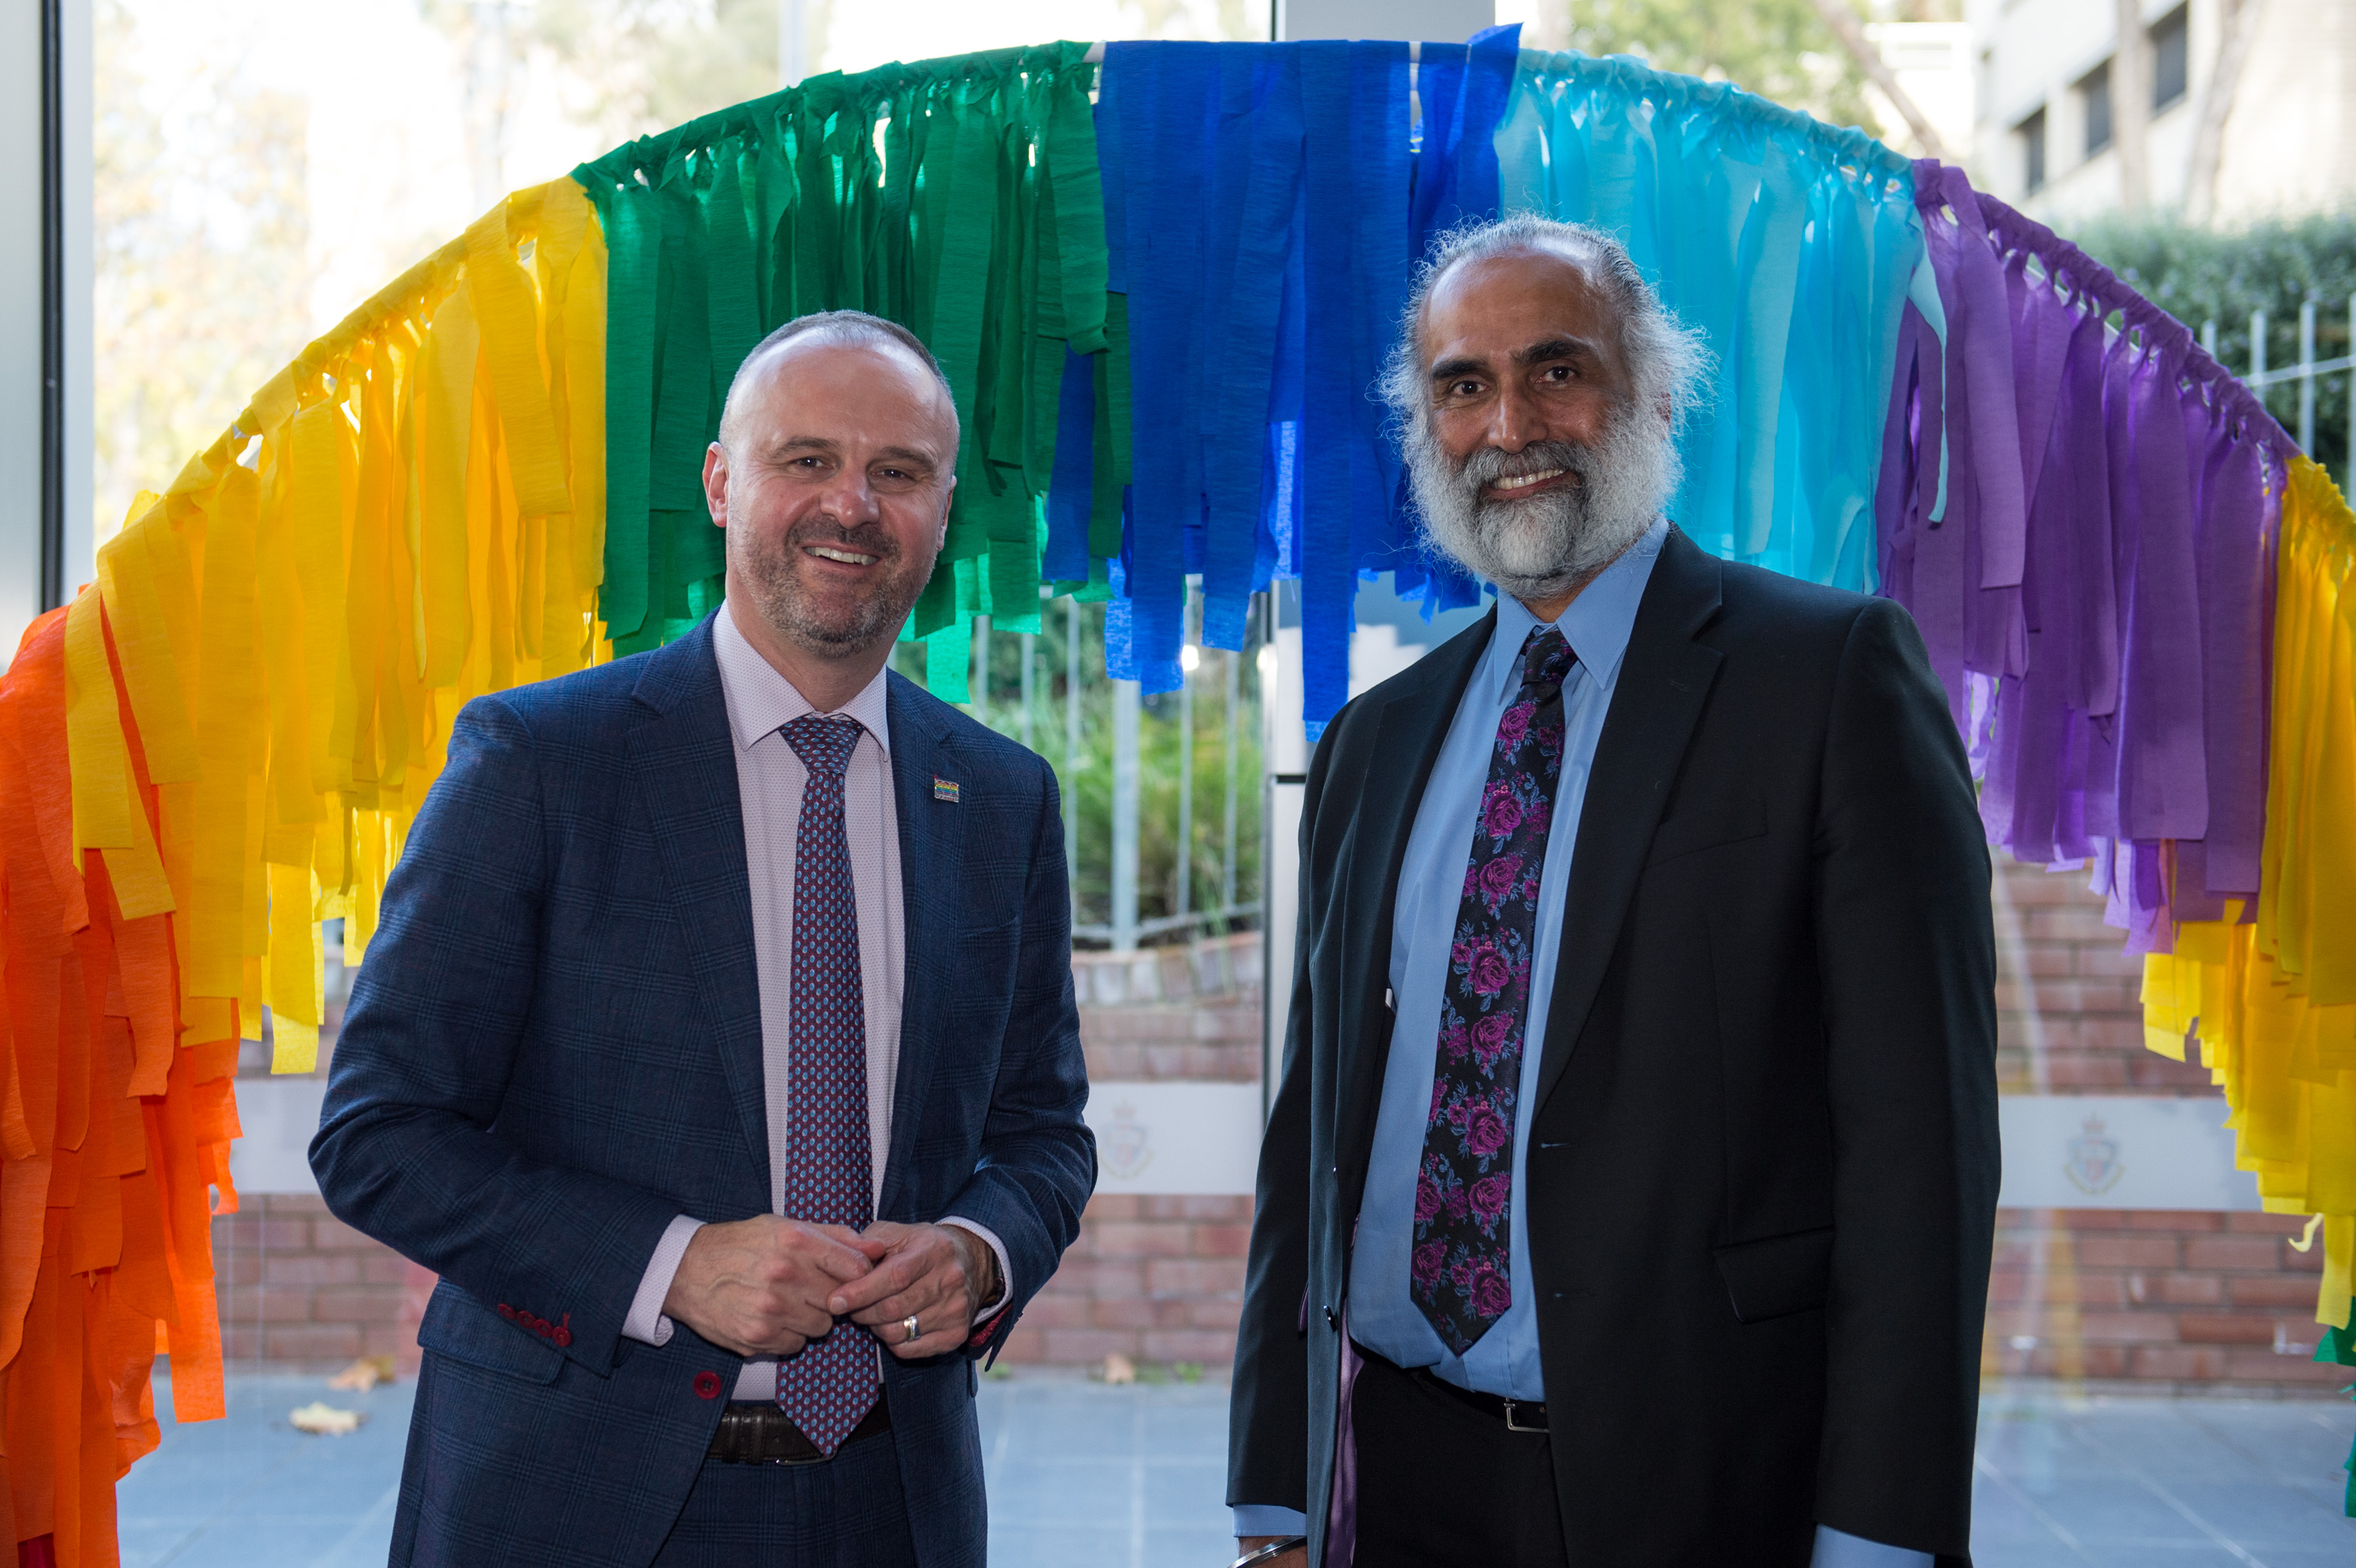 Andrew Barr and Harvi Sidhu stand under a rainbow banner in celebration of IDAHOBIT 